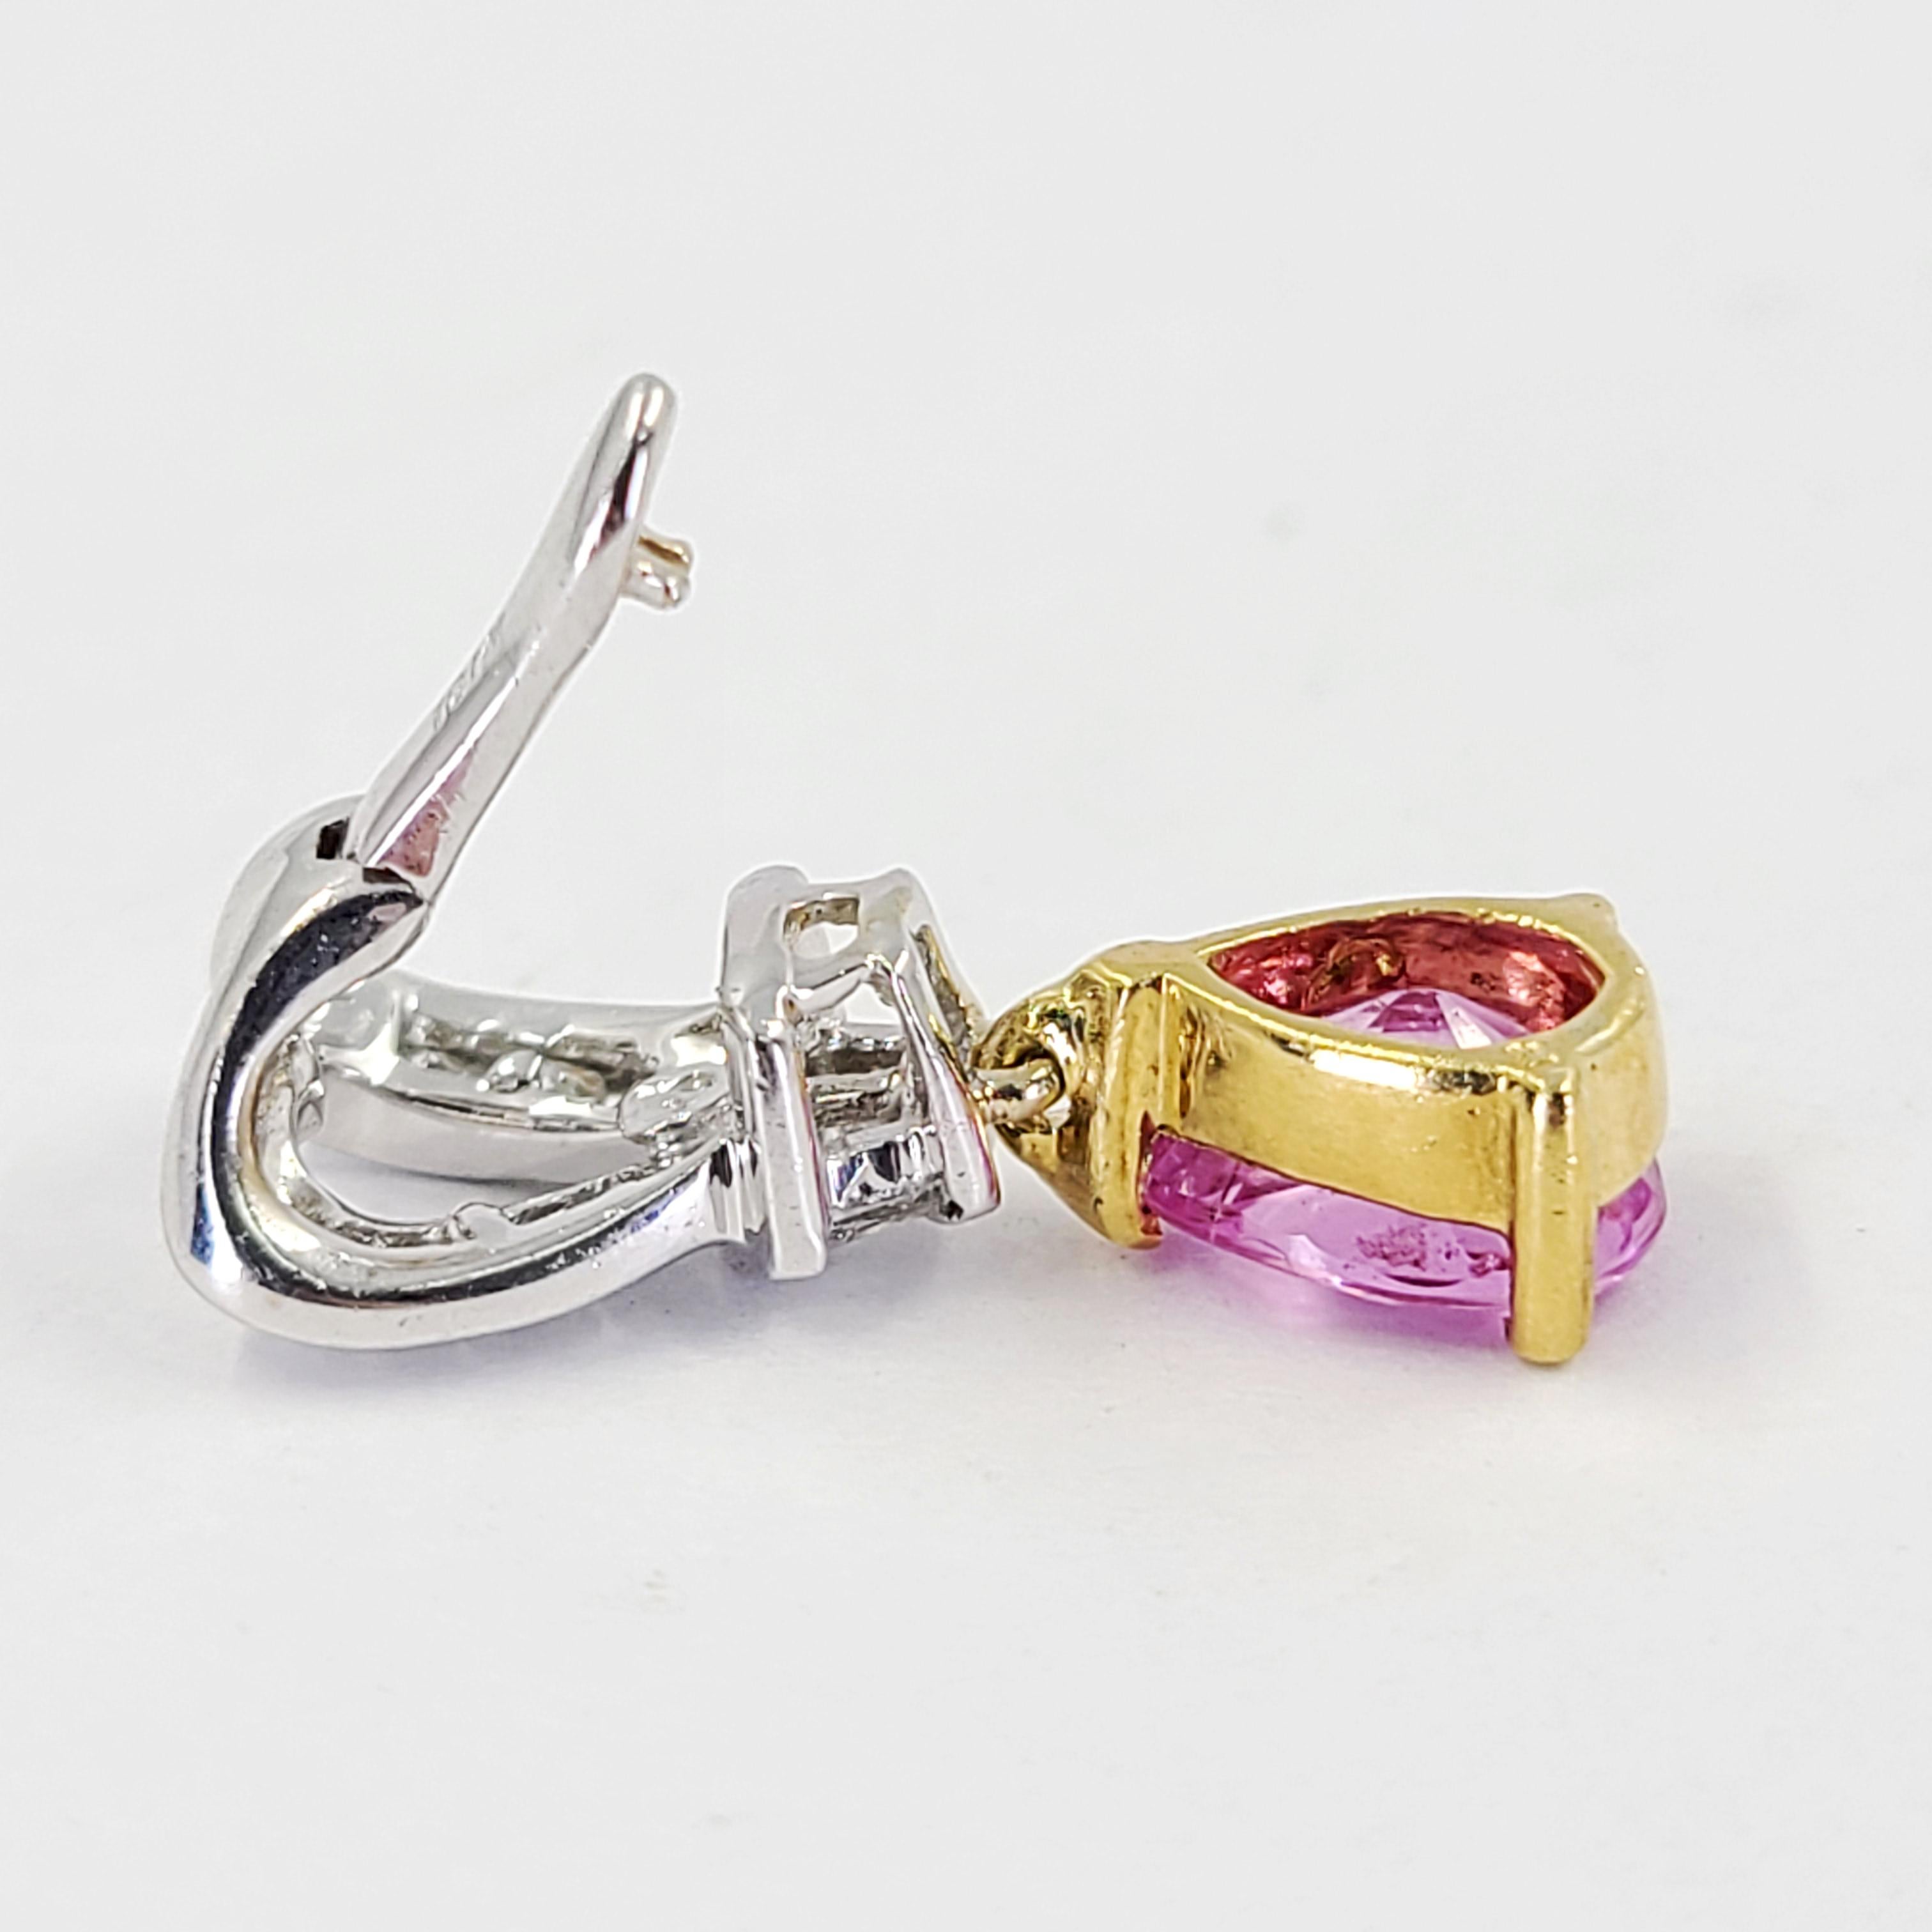 18 Karat White & Yellow Gold Hinged Enhancer Pendant Featuring A Dangling 1 Carat Pear Cut Pink Sapphire Accented By 10 Channel Set Round & Baguette Cut Diamonds Of VS Clarity & H Color Totaling 0.25 Carats. 0.75 Inch Length. Does not include a